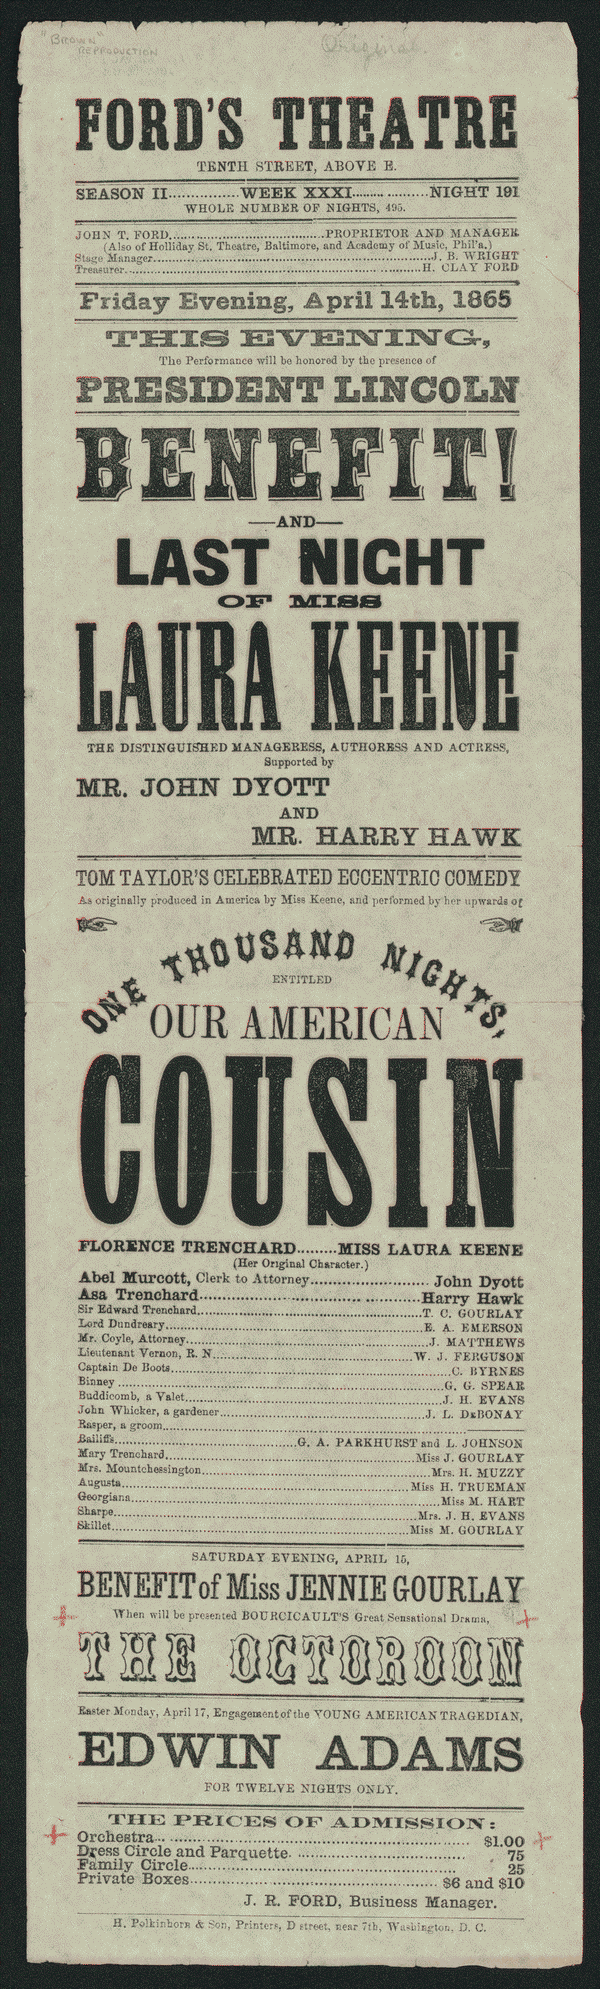 info about our american cousin the play abraham lincoln was medium